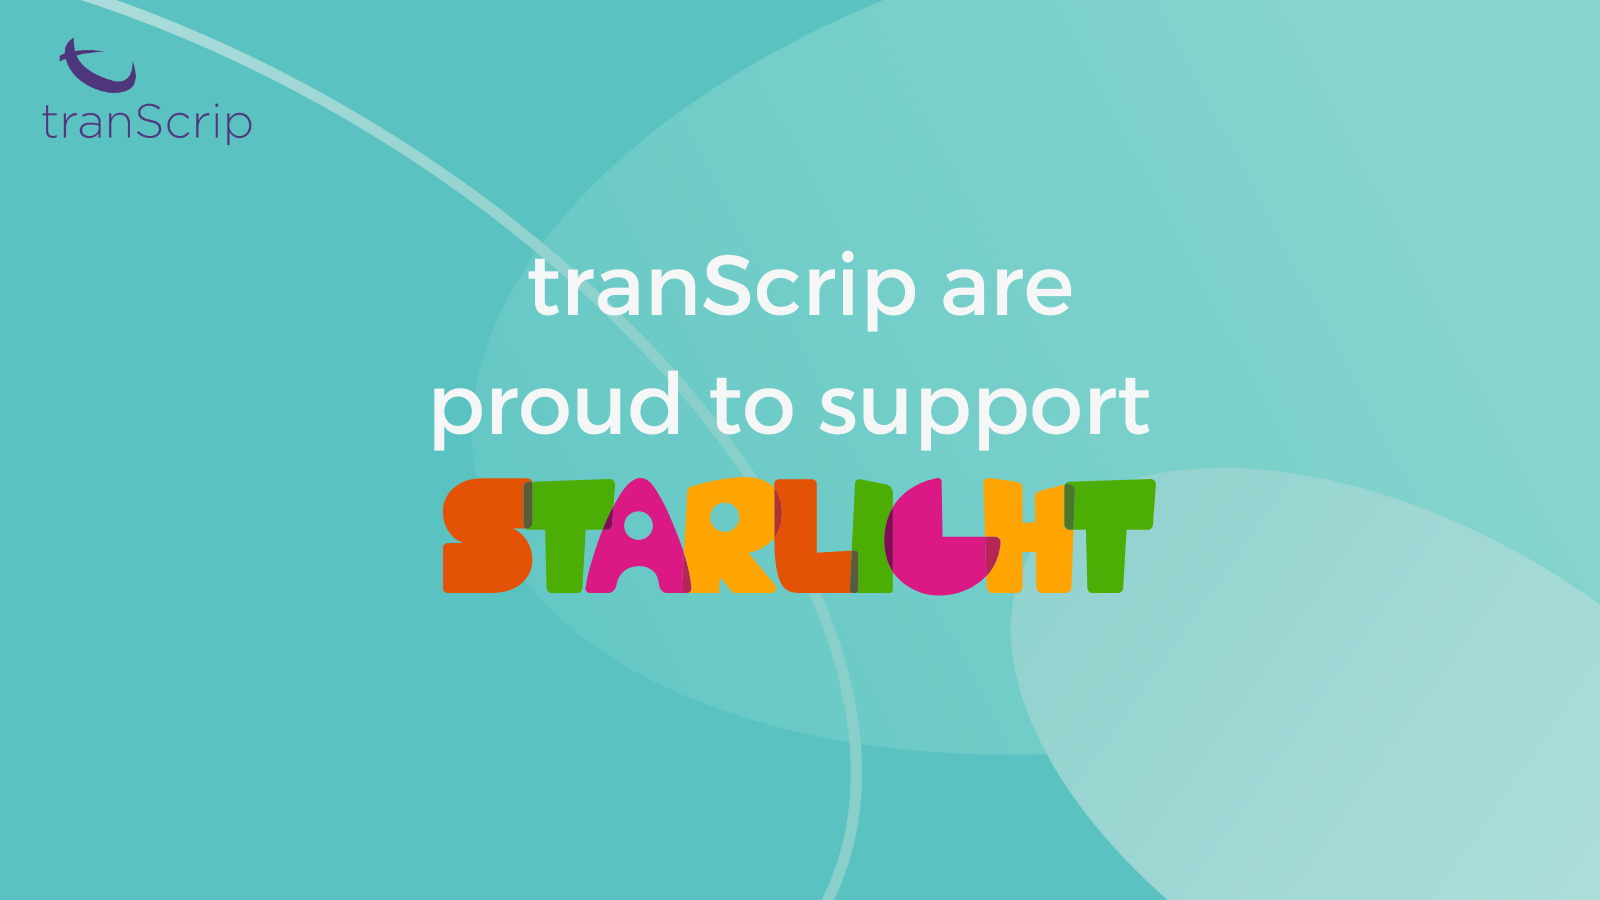 tranScrip are proud to support Starlight